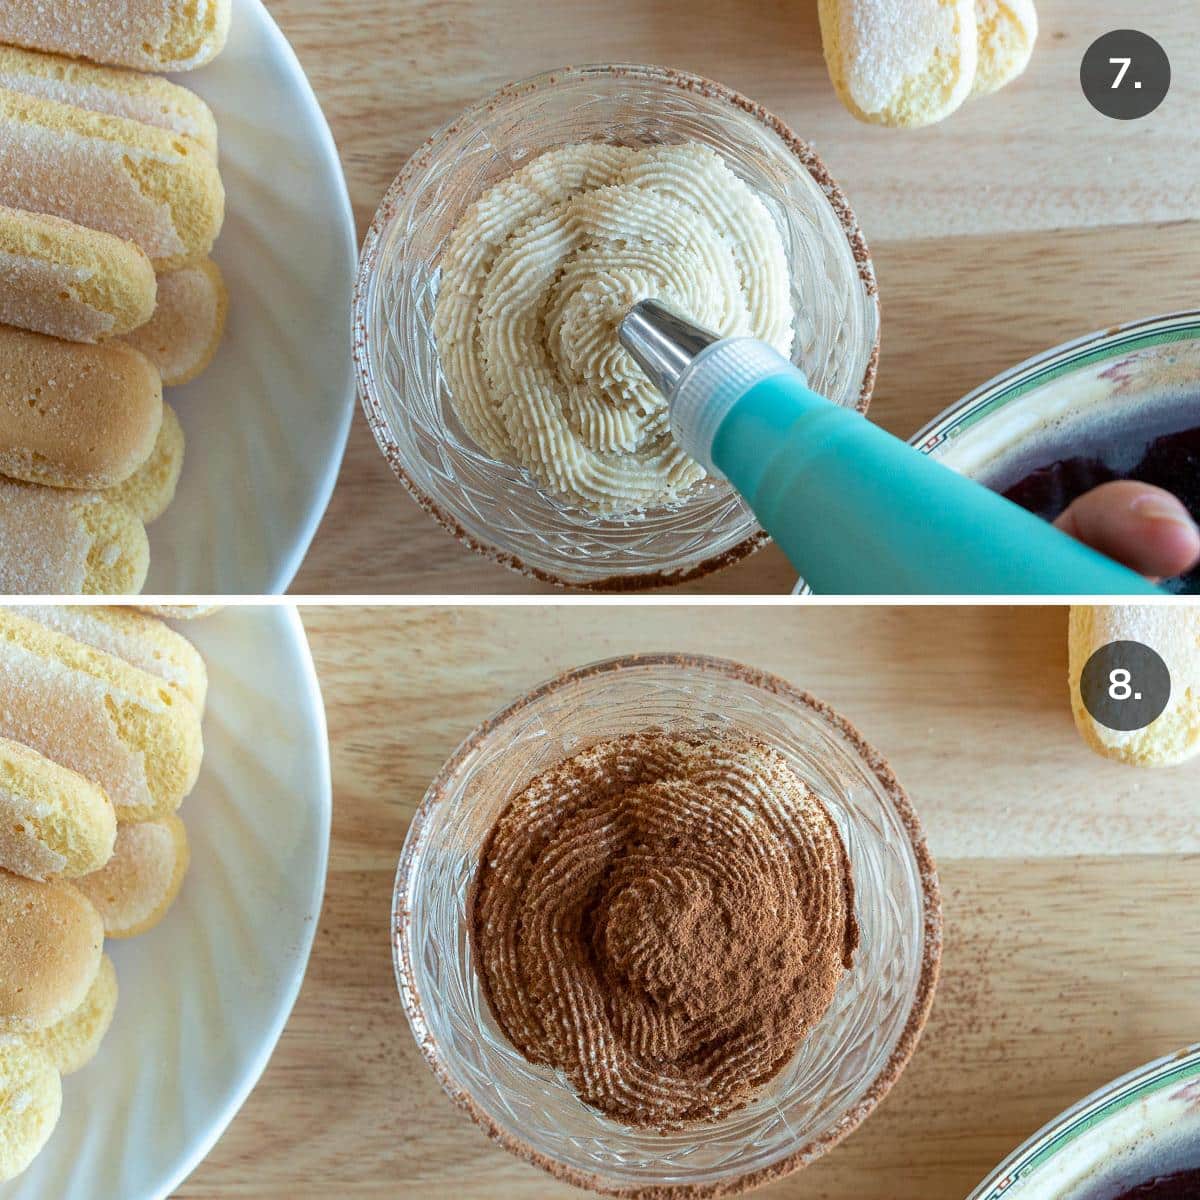 Piping mascarpone cream into the cup and dusted with unsweetened cocoa powder.